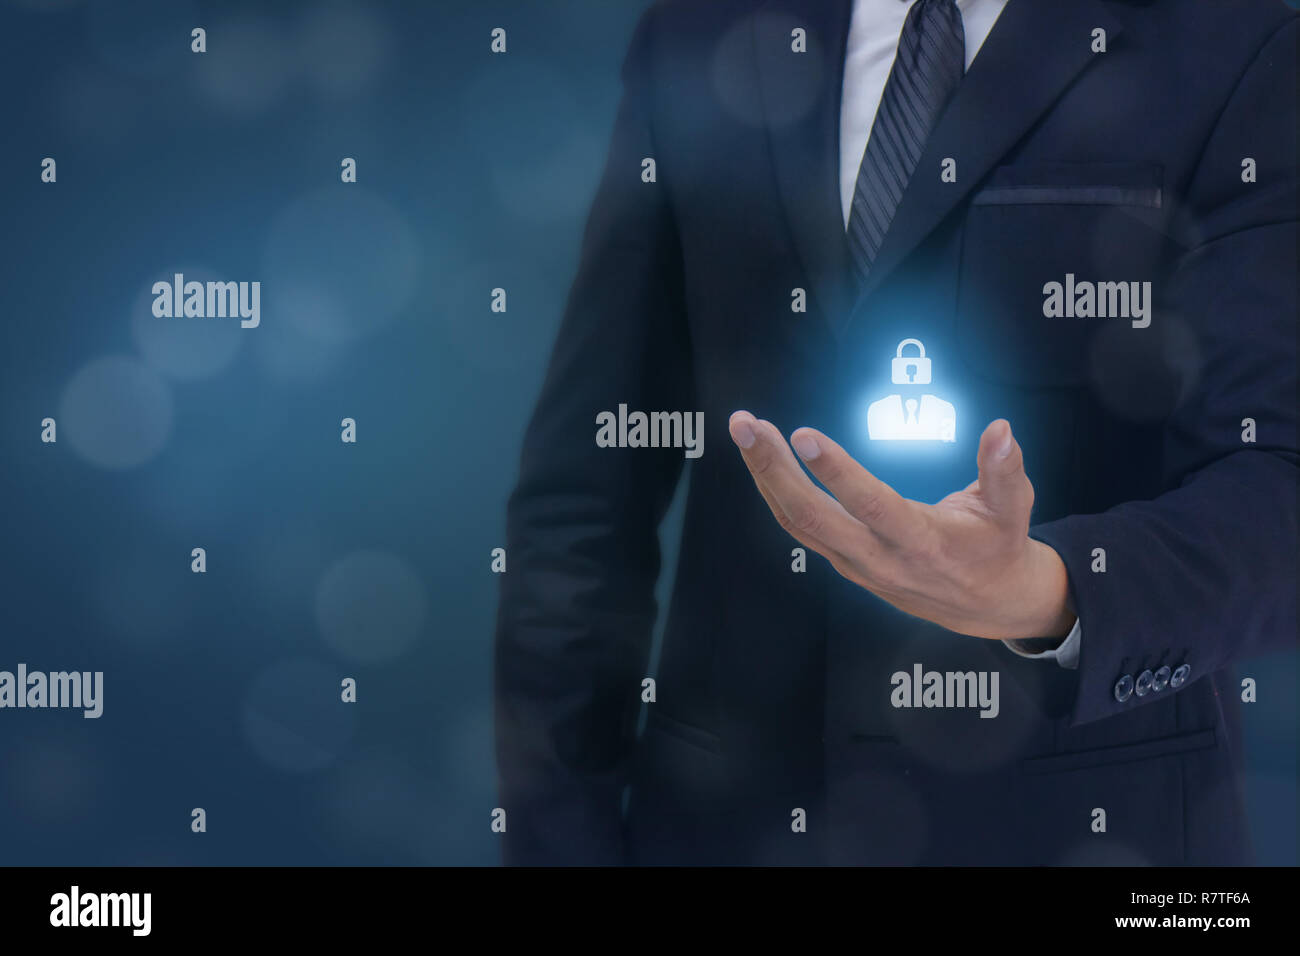 GDPR personal data protections concept, business man hand holding the GDPR sign icon , man, company, business owner try to protection the data of pers Stock Photo